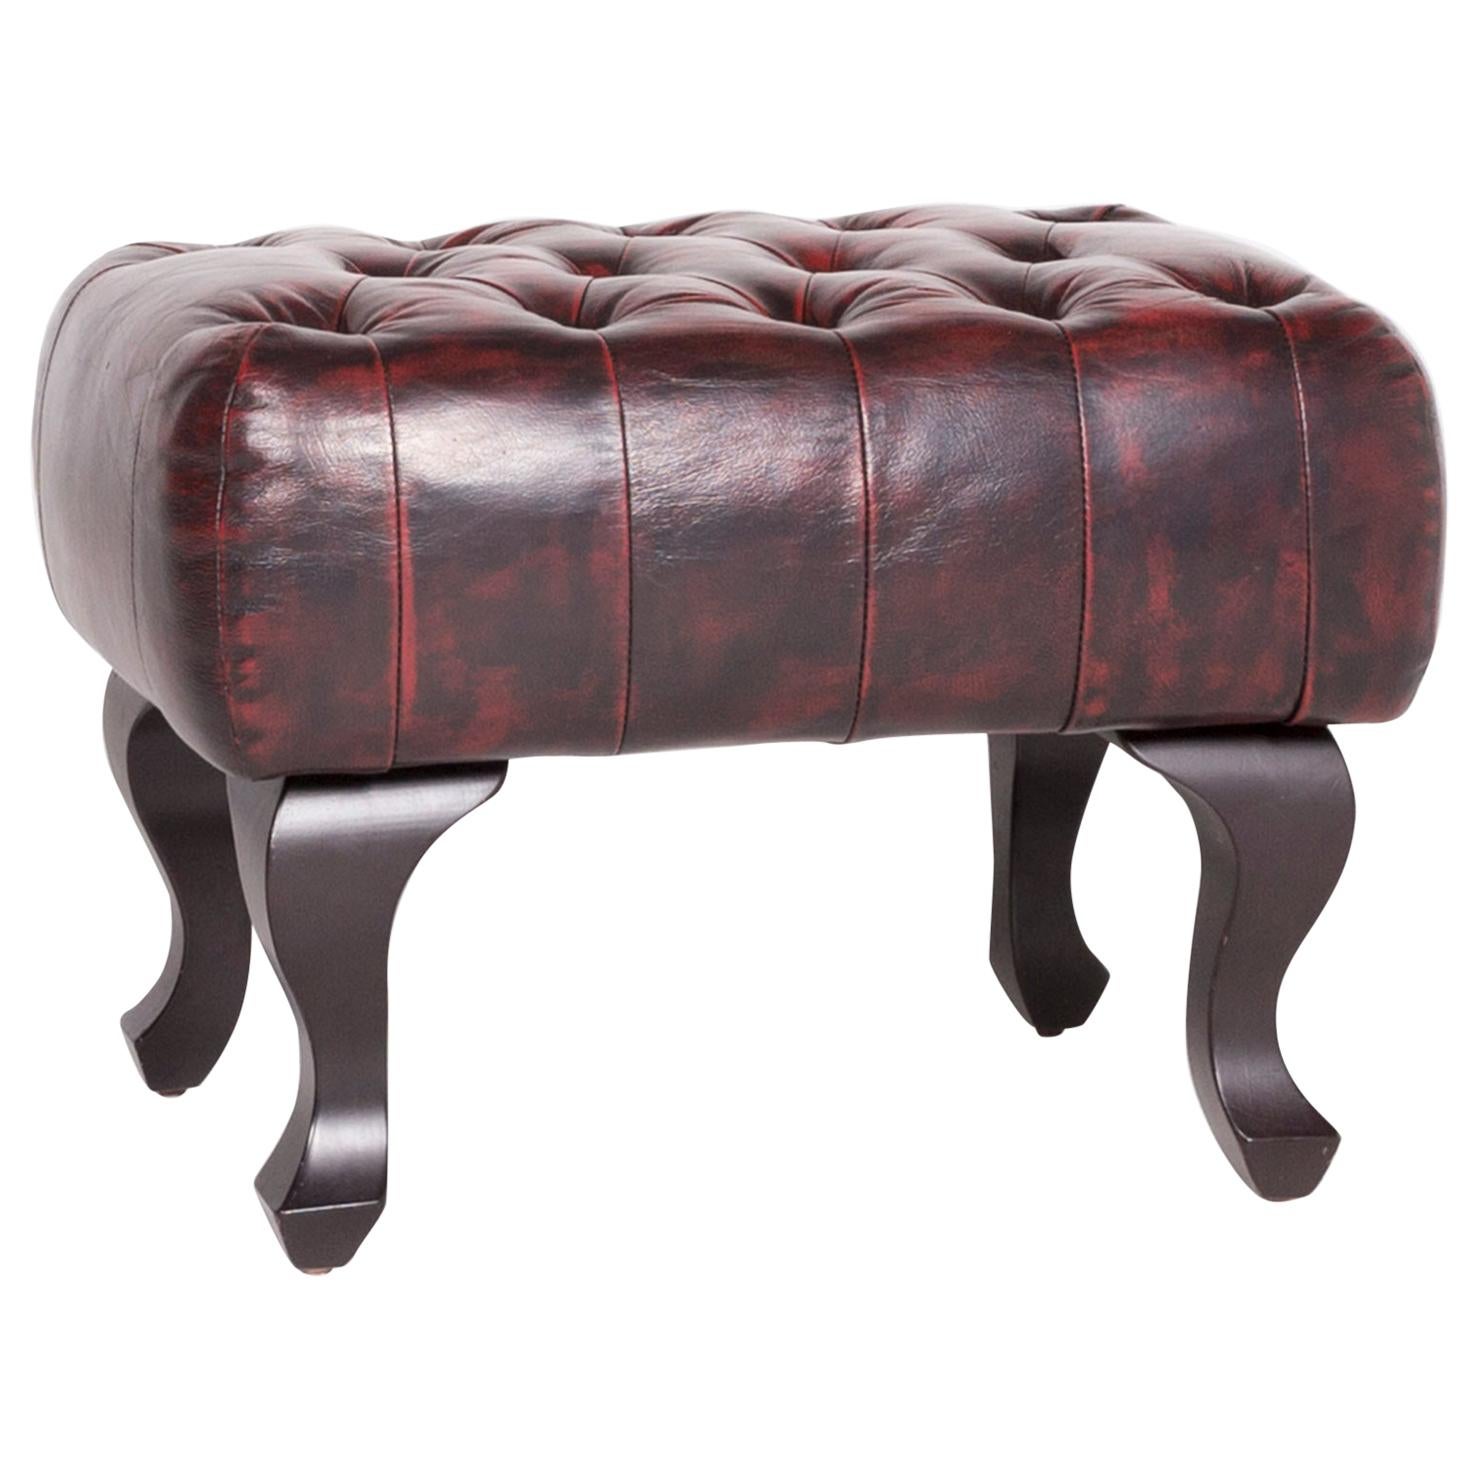 Chesterfield Leather Stool Red Genuine Leather Stool Vintage Retro For Sale